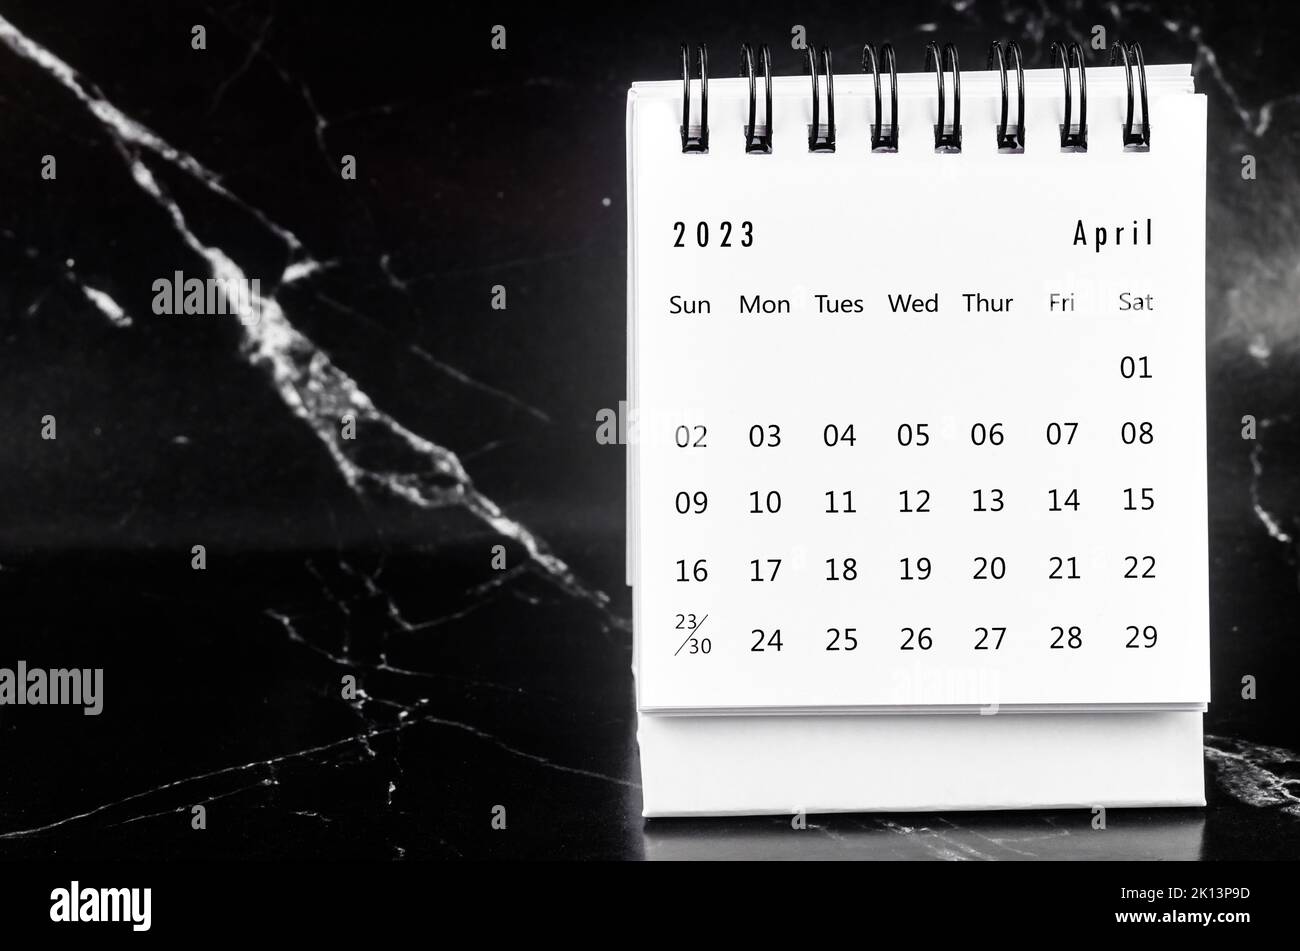 April 2023 Monthly desk calendar for 2023 year on black marble background. Stock Photo